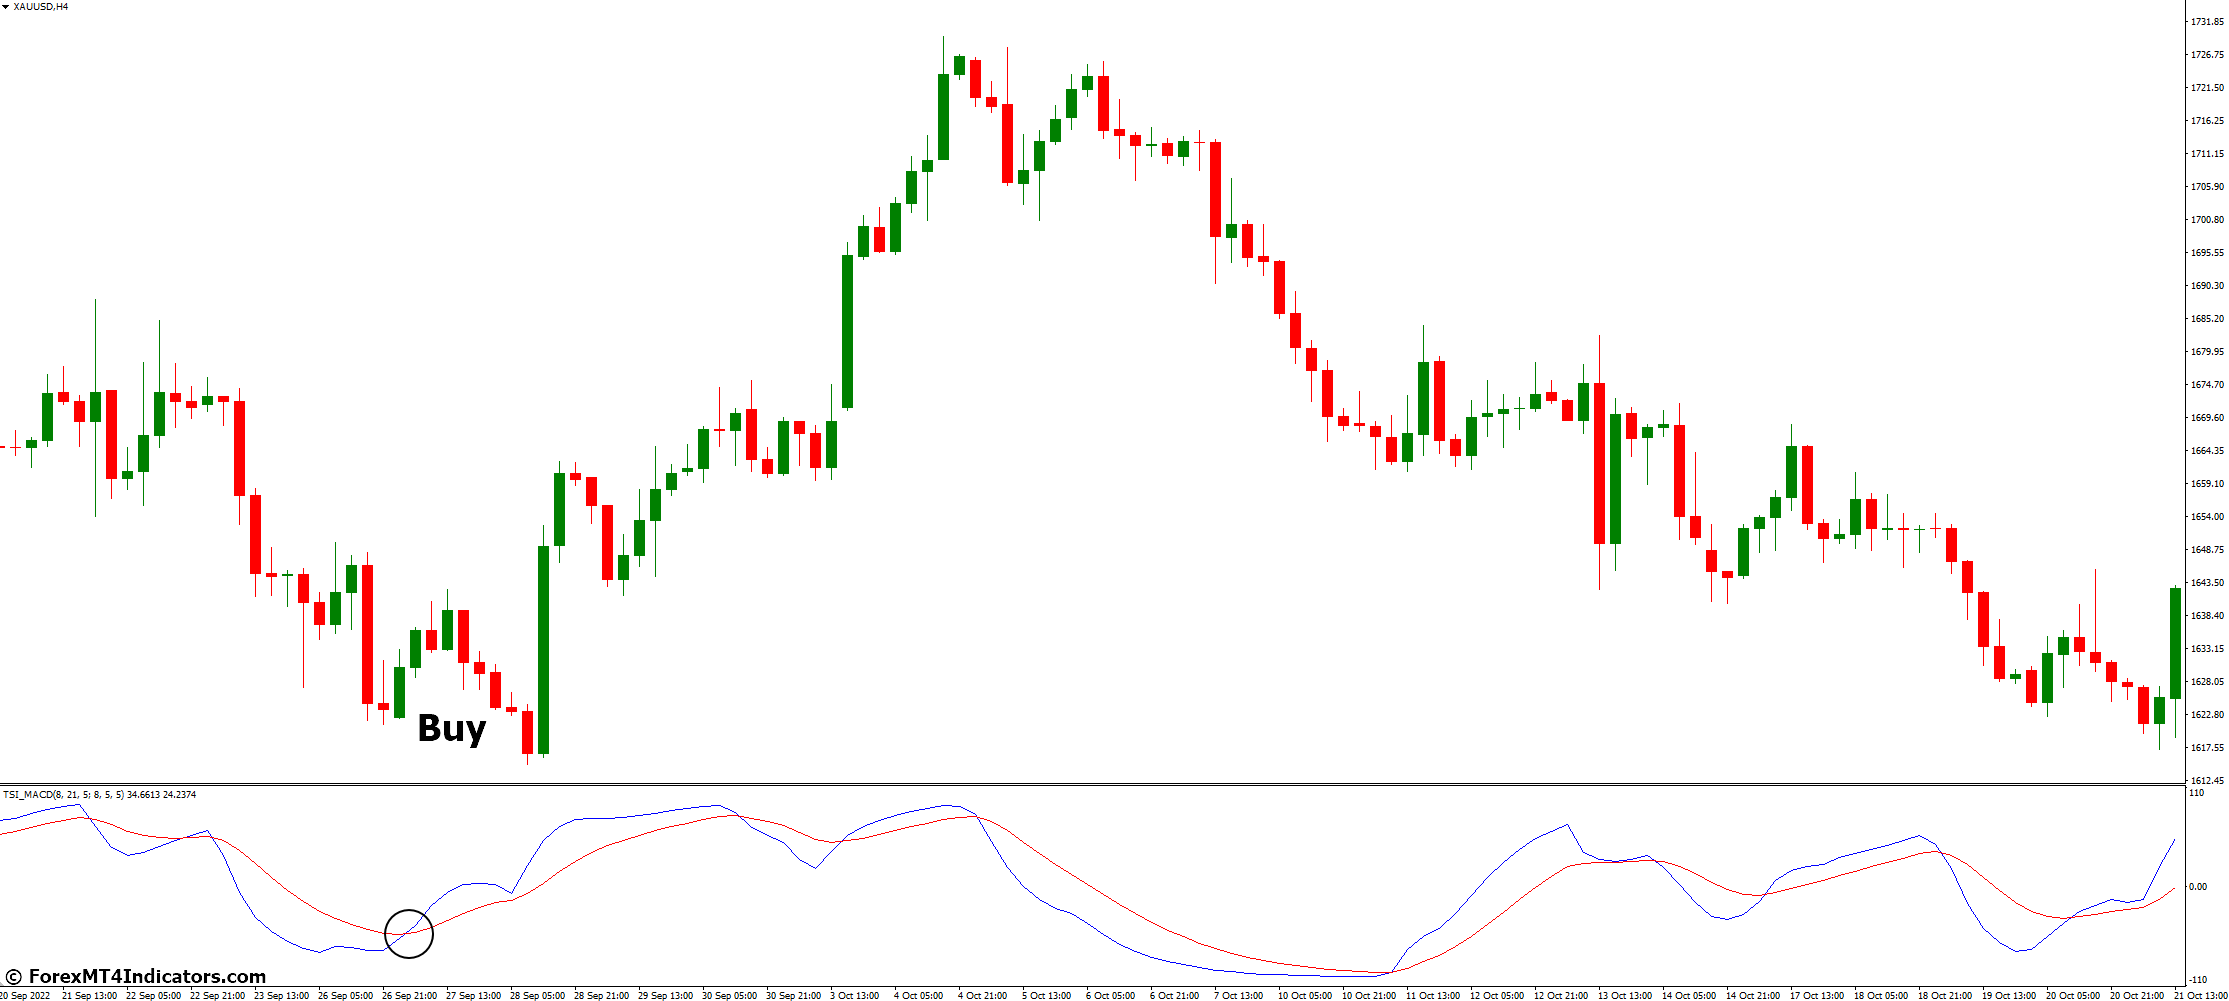 How to Trade with TSI MACD MT4 Indicator - Buy Entry